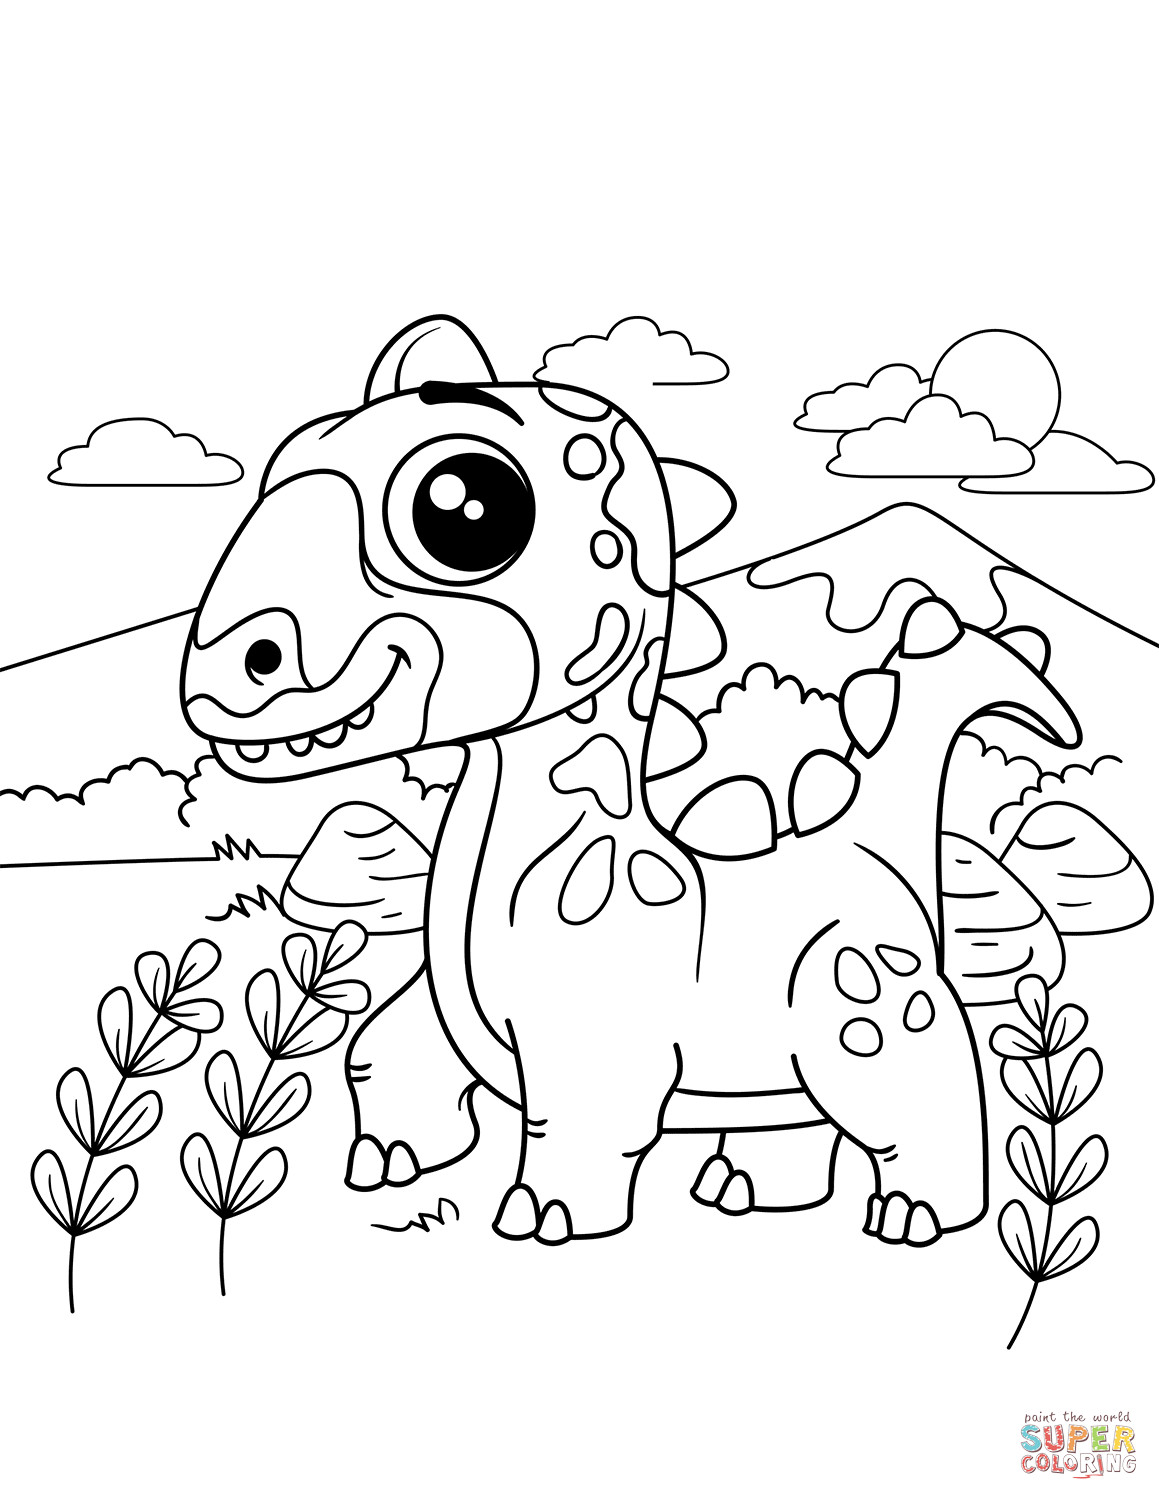 Printable Coloring Dinosaur Colouring Pages Pdf - Dinosaurs are fun all